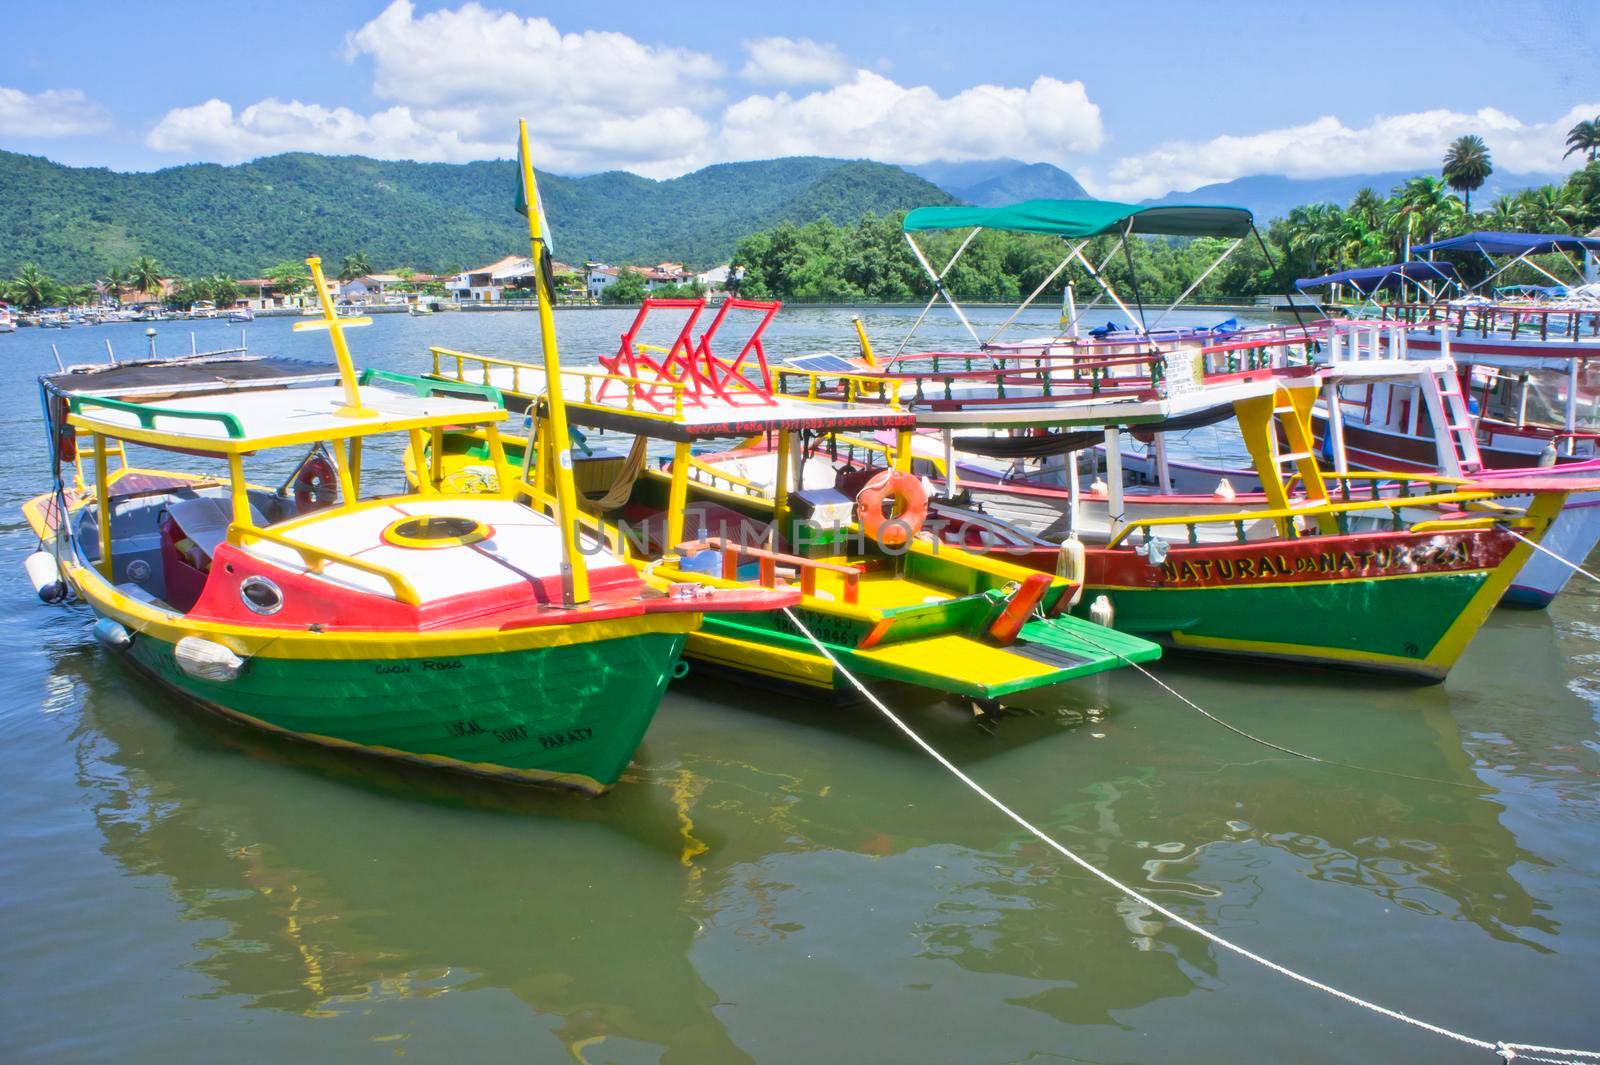 Paraty, Old city view with colorful boats, Brazil, South America